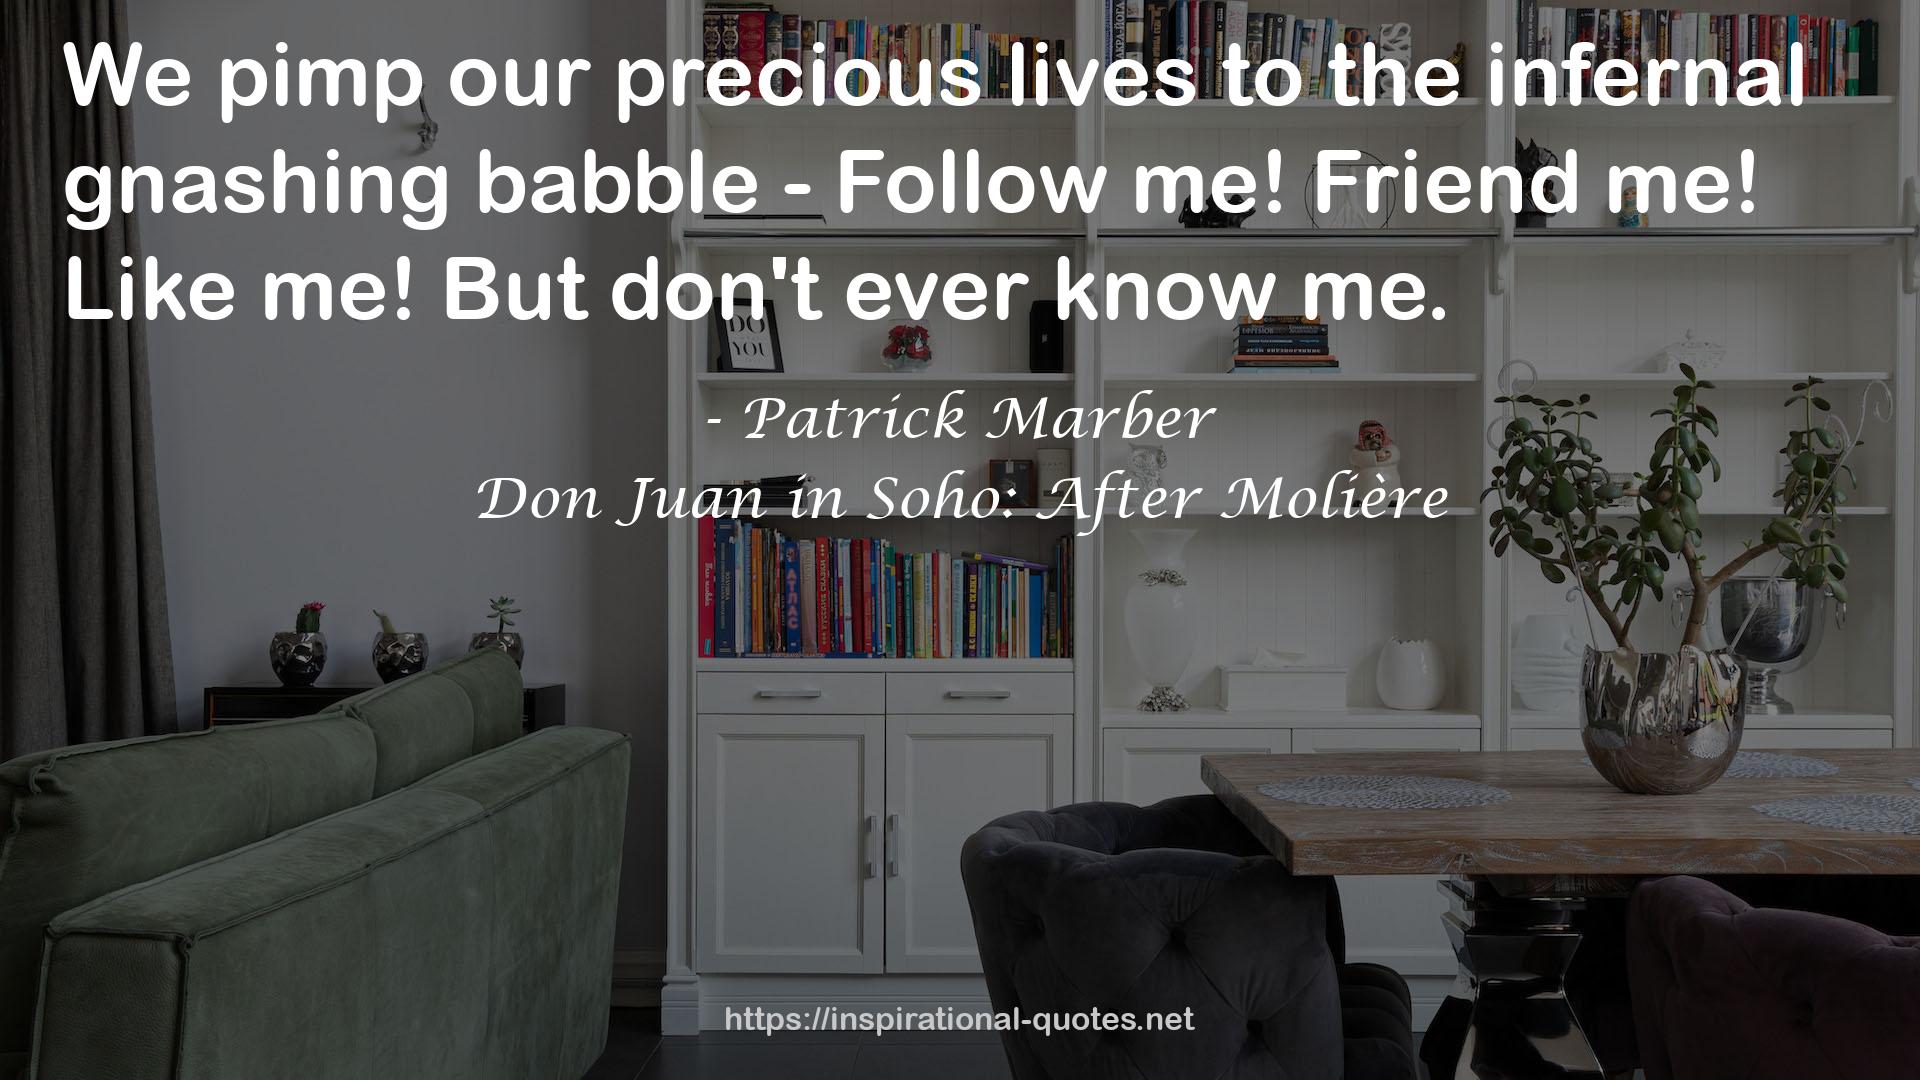 Patrick Marber QUOTES